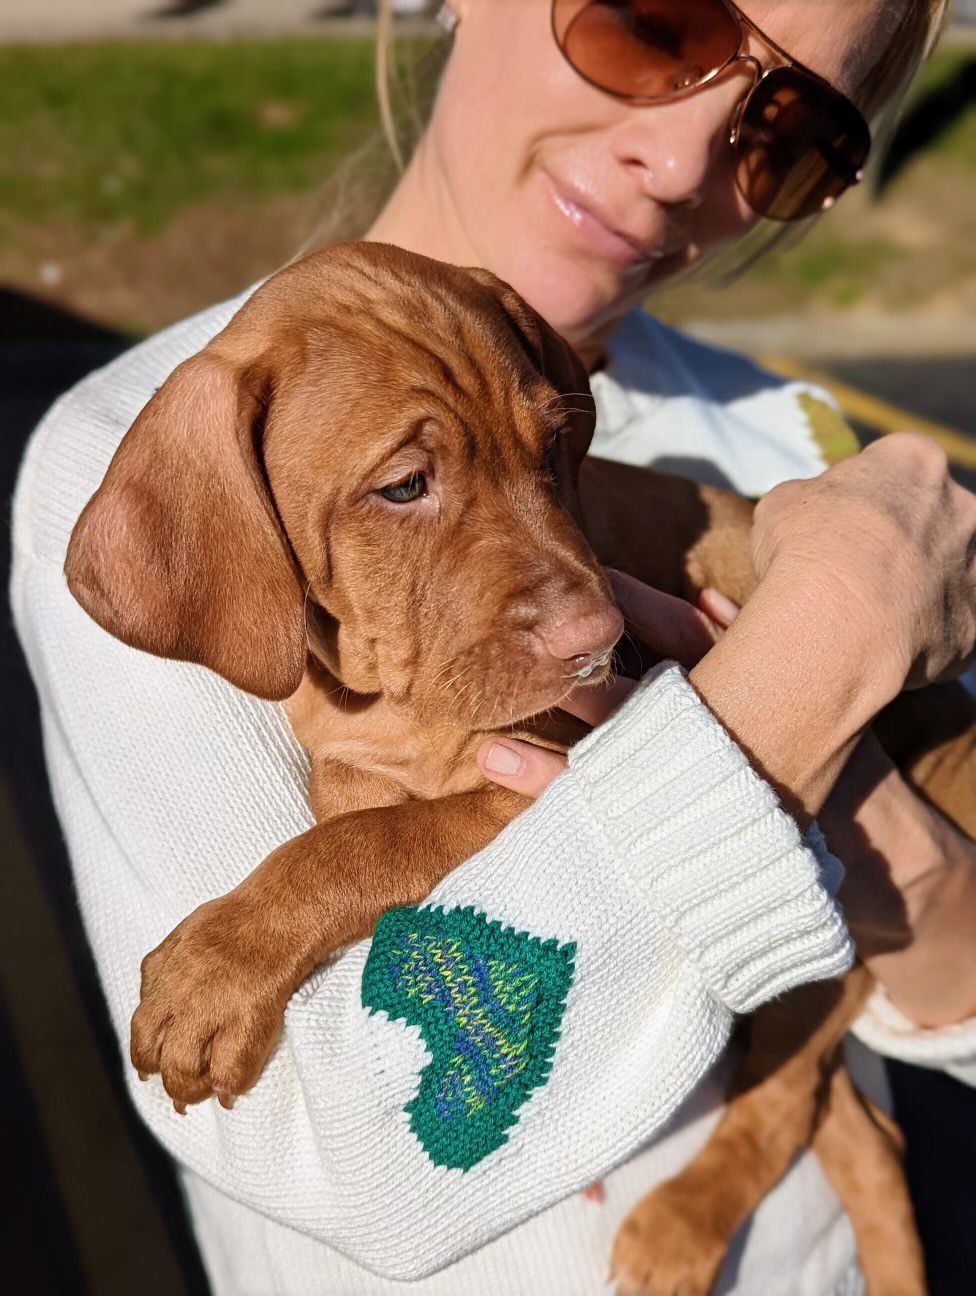 Fox News personality Dana Perino with her new puppy, Percy, a Hungarian vizsla.